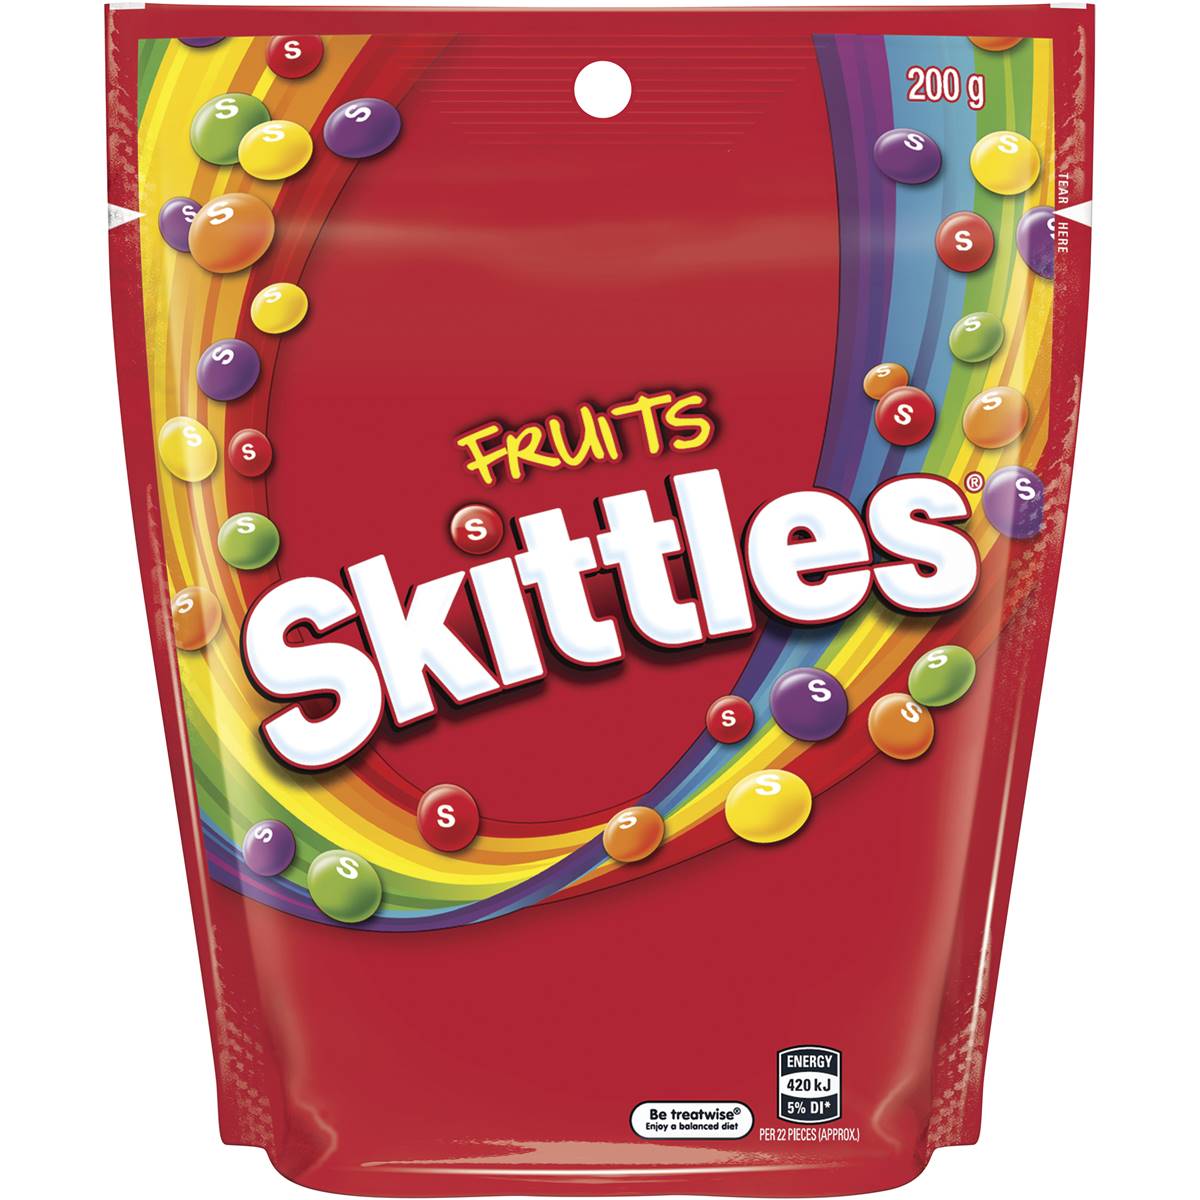 Skittles Fruits Chewy Lollies Party Share Bag 200g